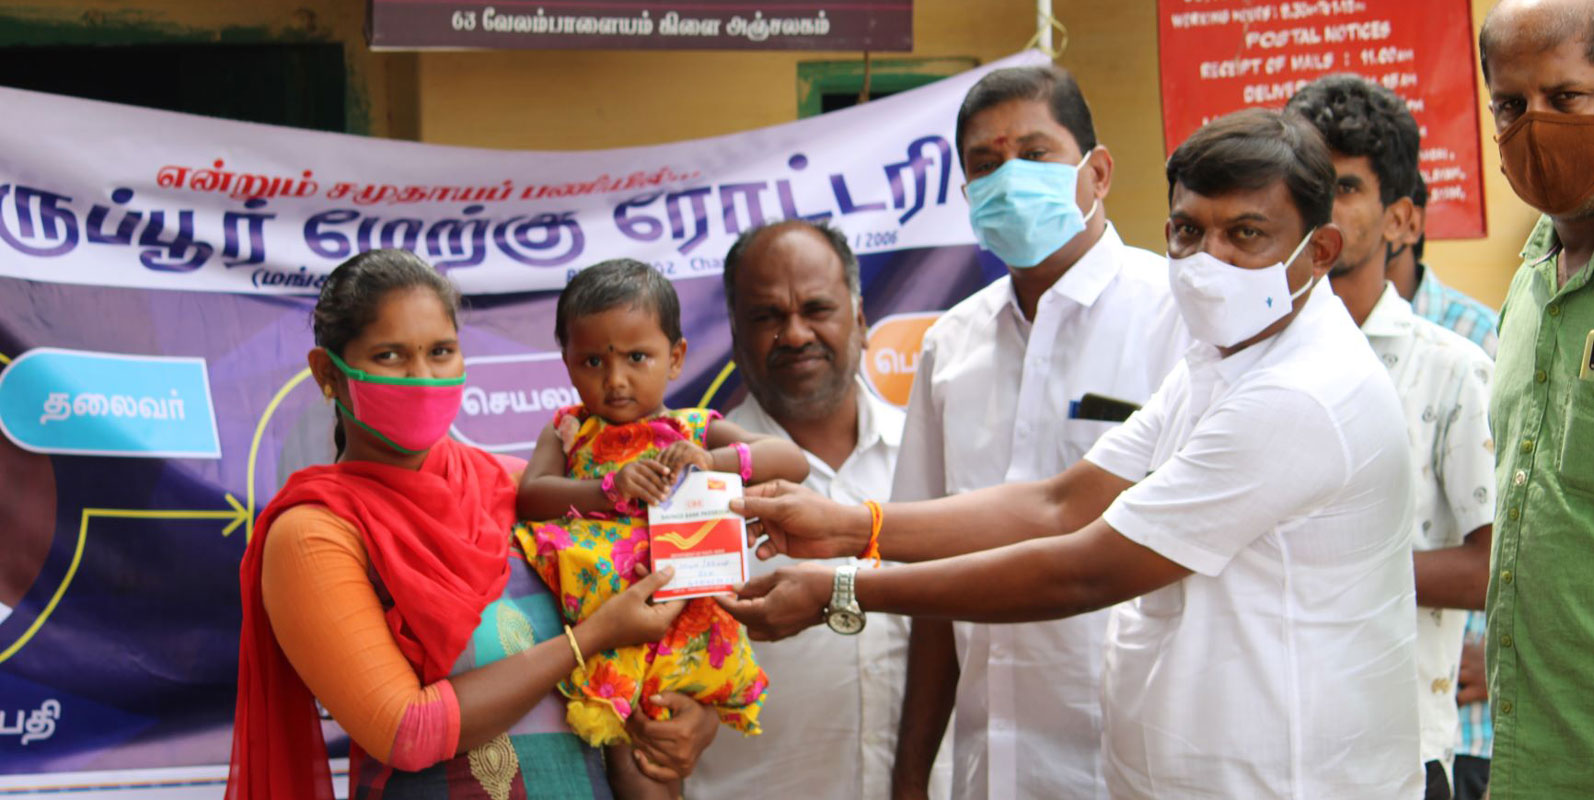 Club president V Raghupathy hands over a savings certificate to a girl child in the presence of club members Balasubramaniam and Nataraj.